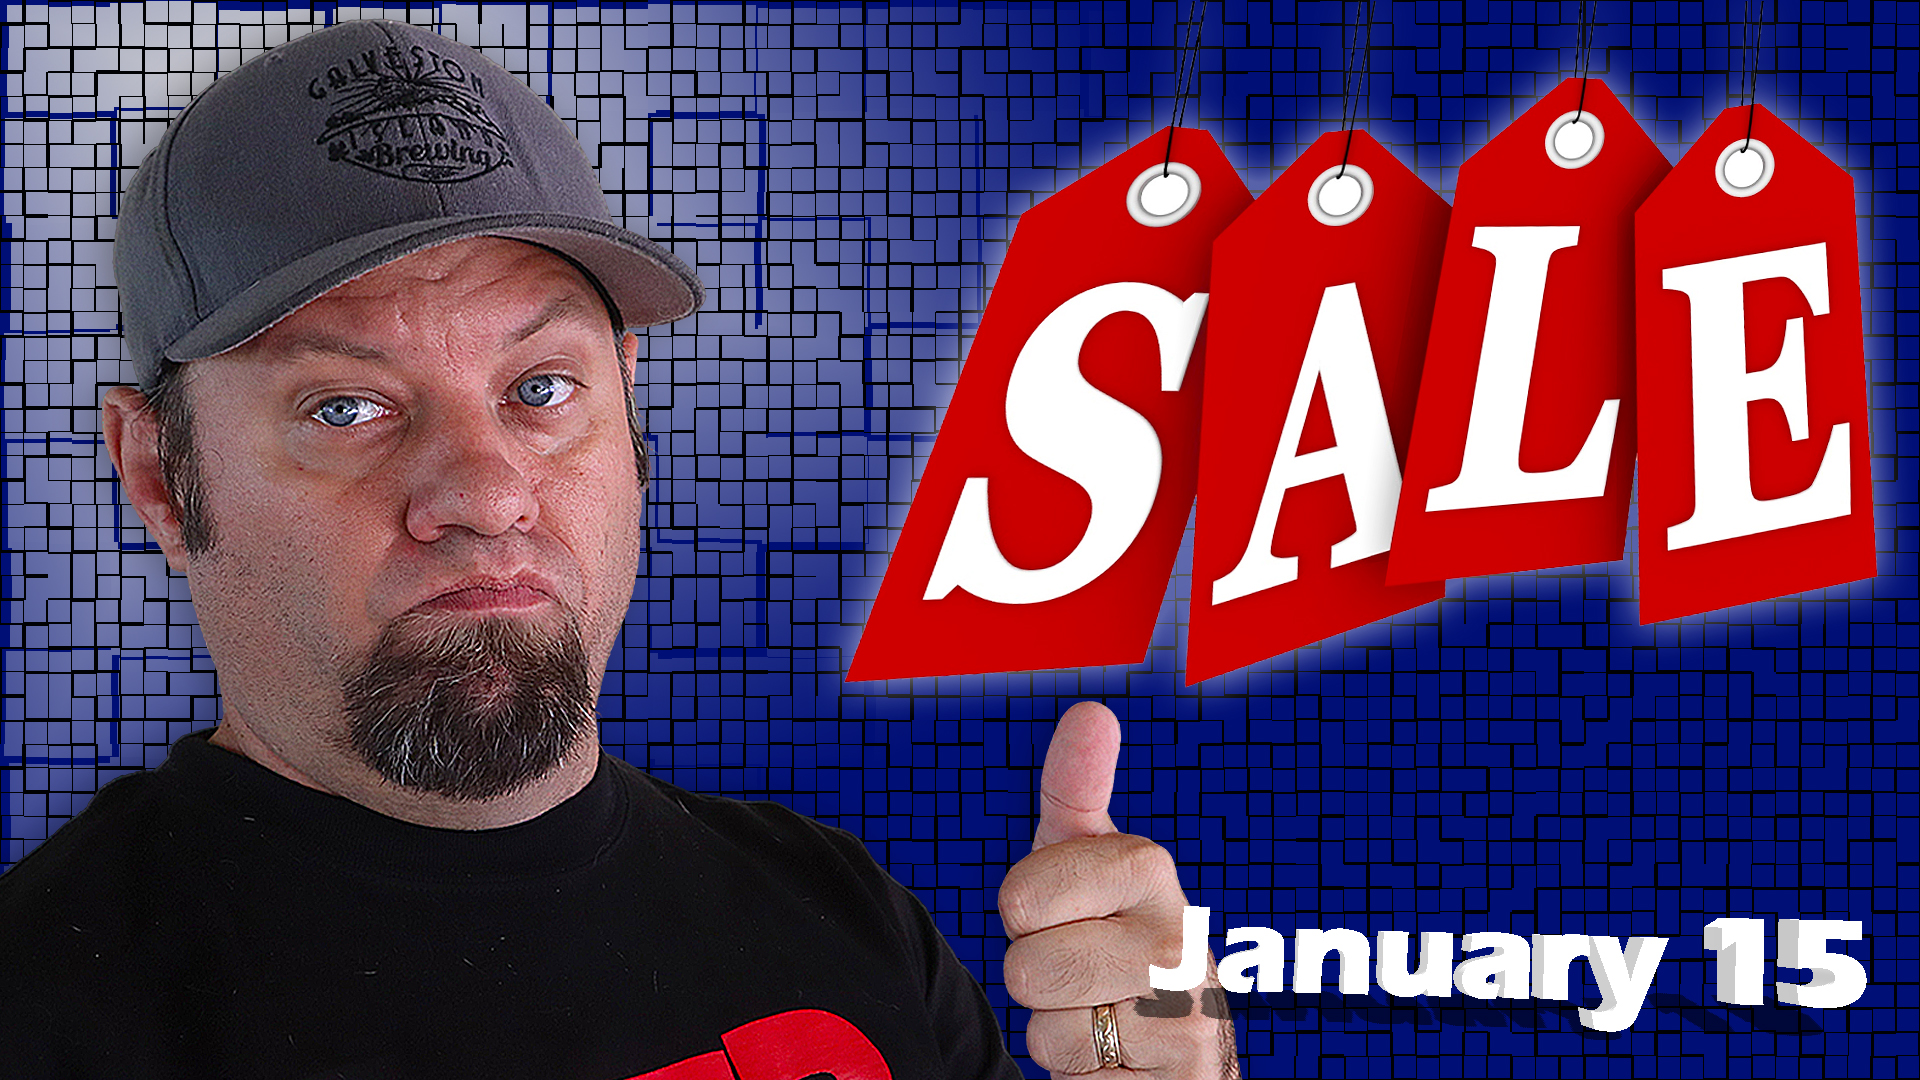 Episode 532: Ham Radio Shopping Deals for January 15th